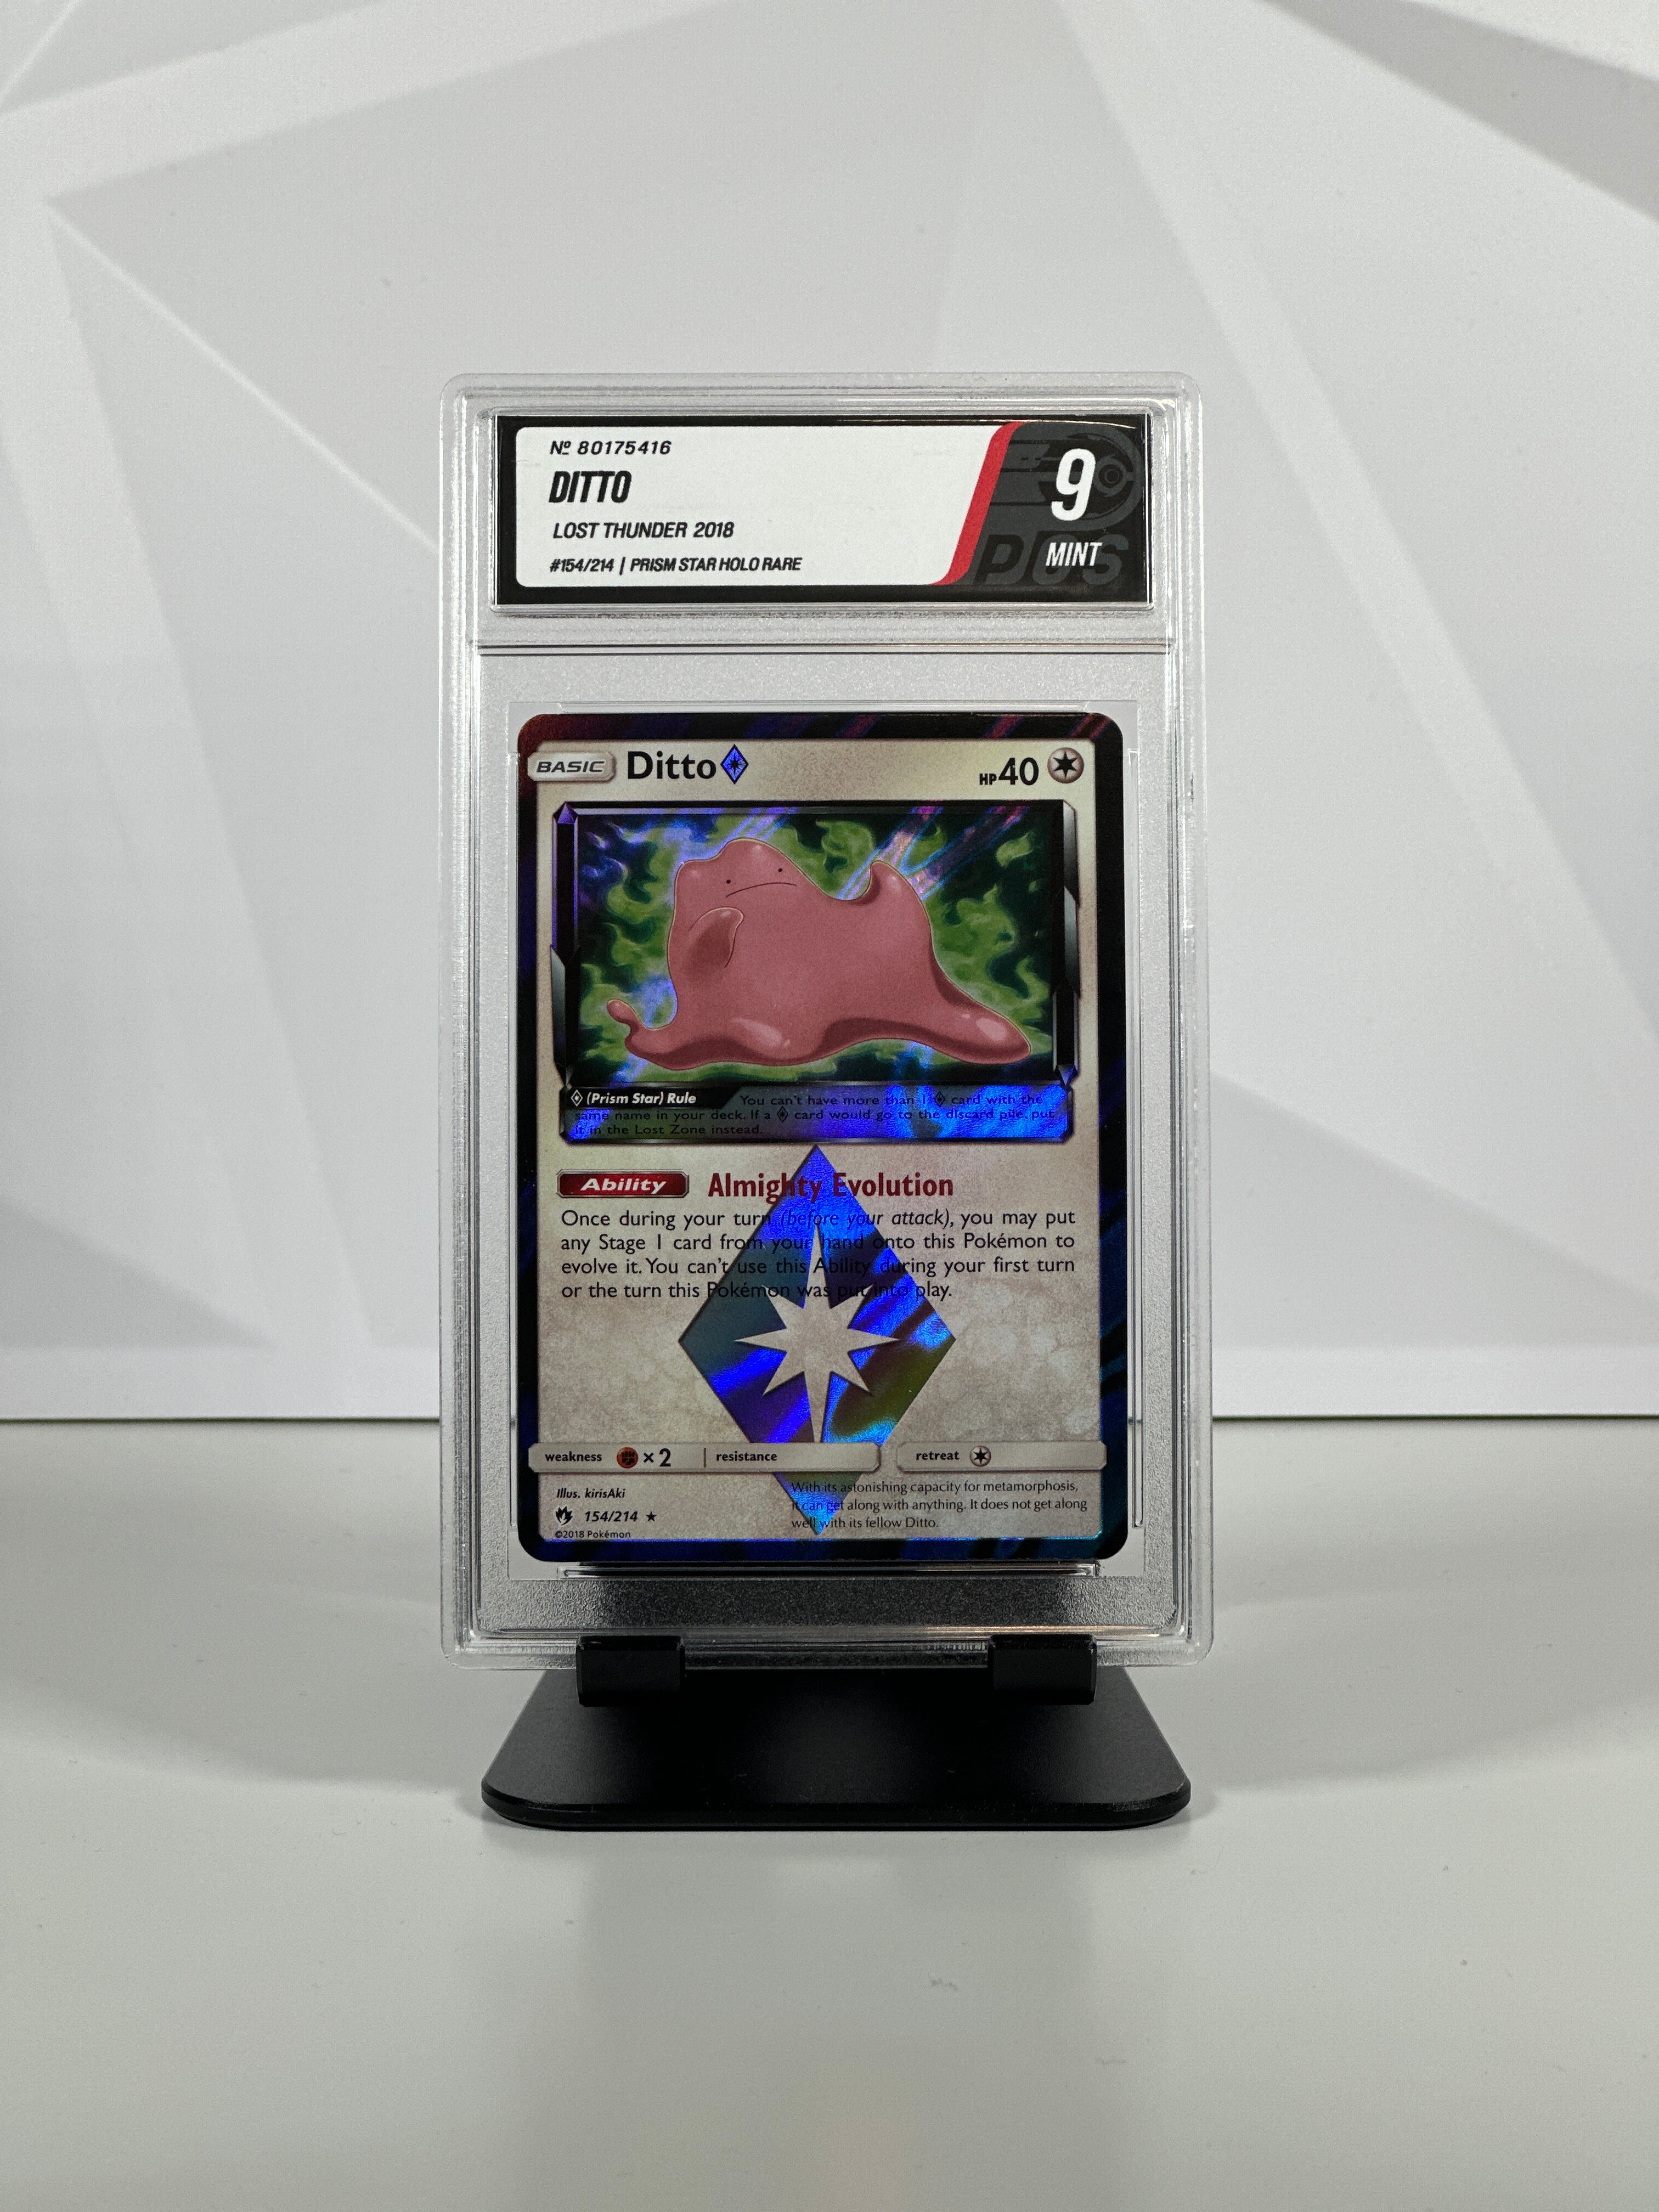 Ditto Lost Thunder 2018 PSA 9 / PGS 9